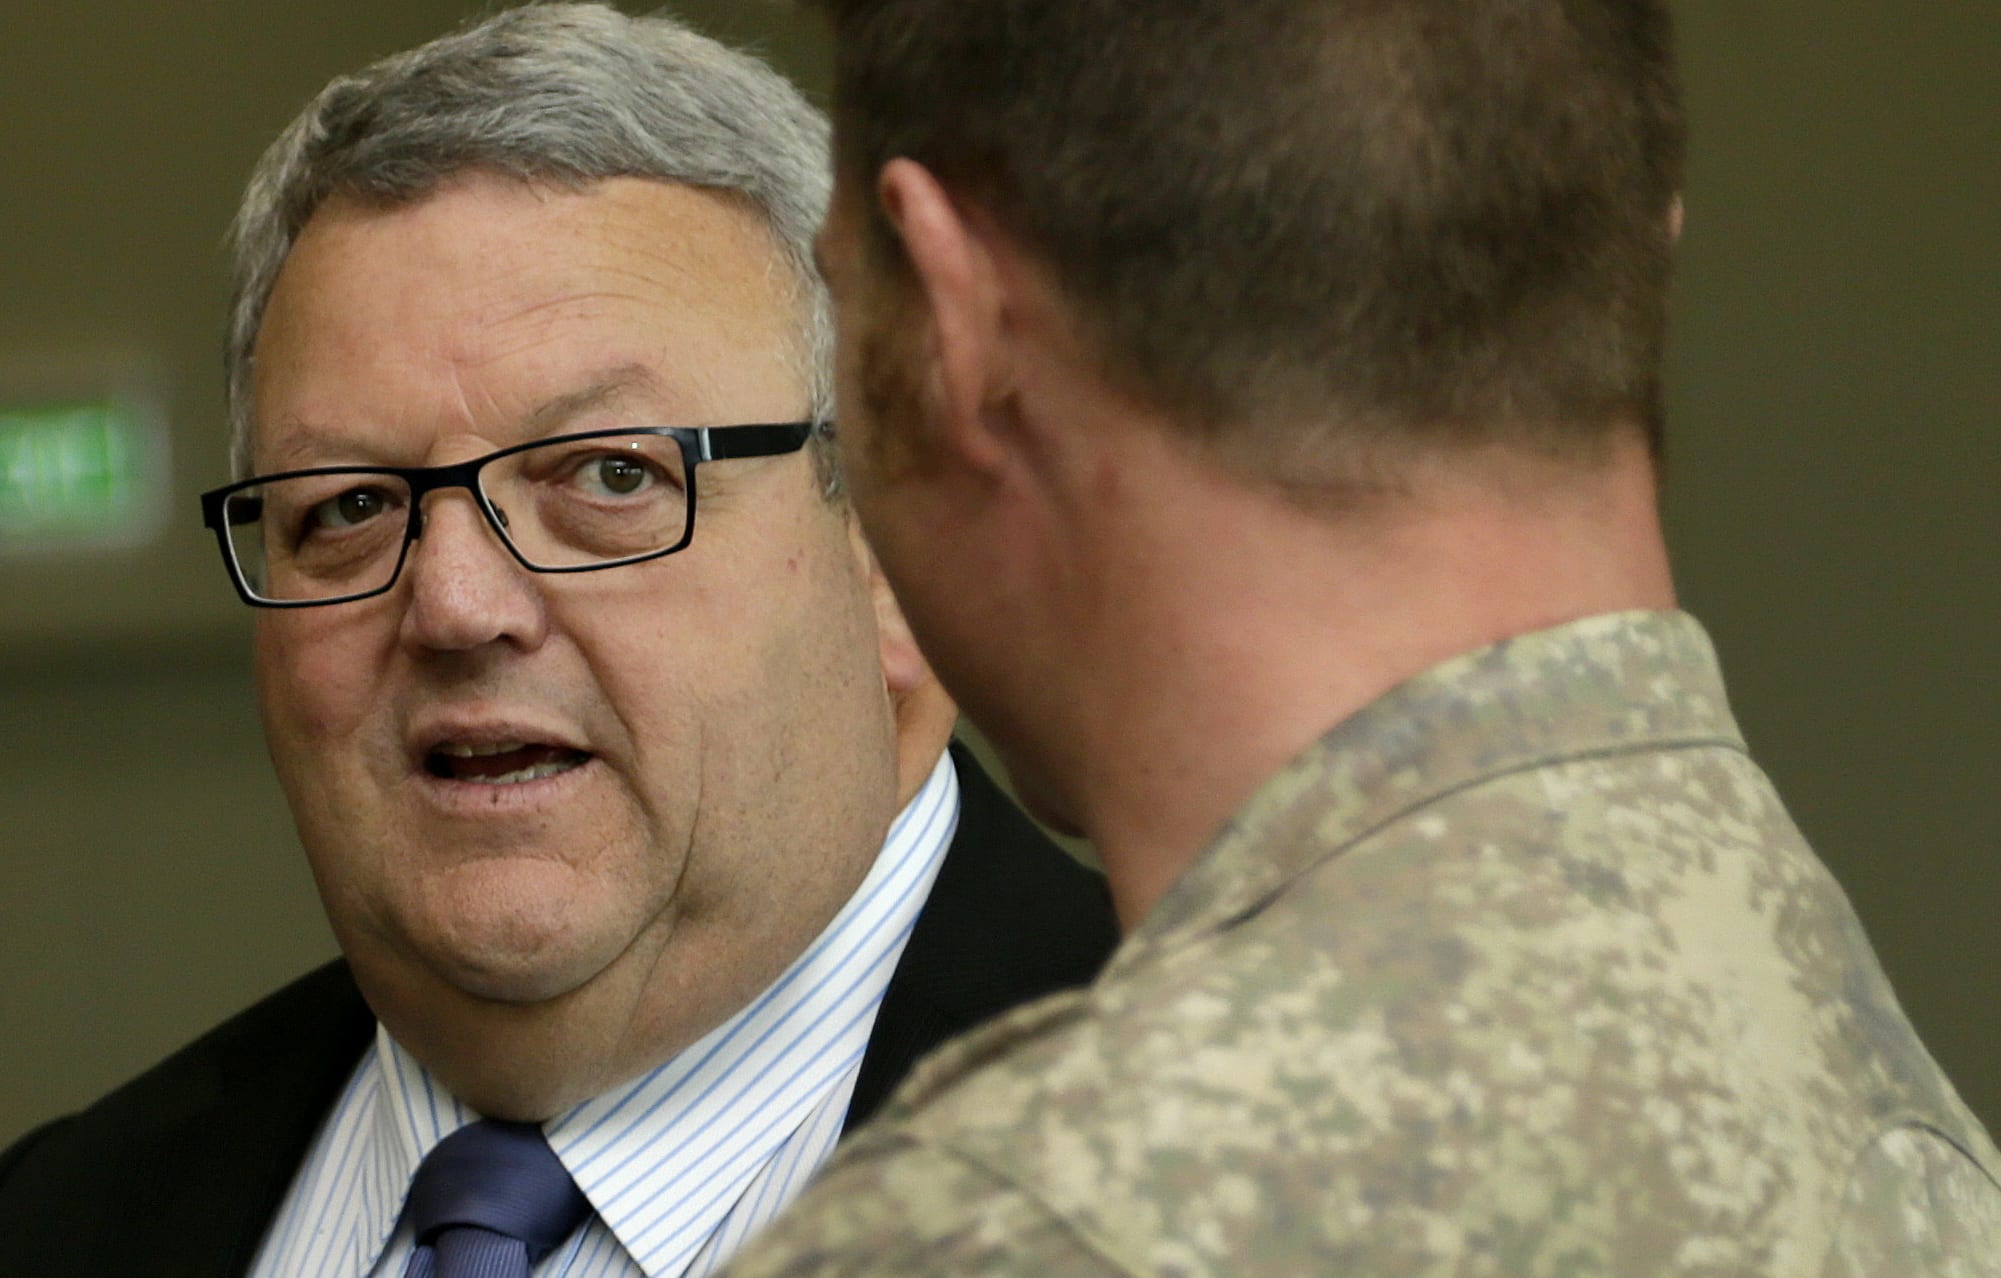 Troops returning from Iraq are welcomed by Defence Minister Gerry Brownlee at Ohakea Air Base on 16 November 2015.